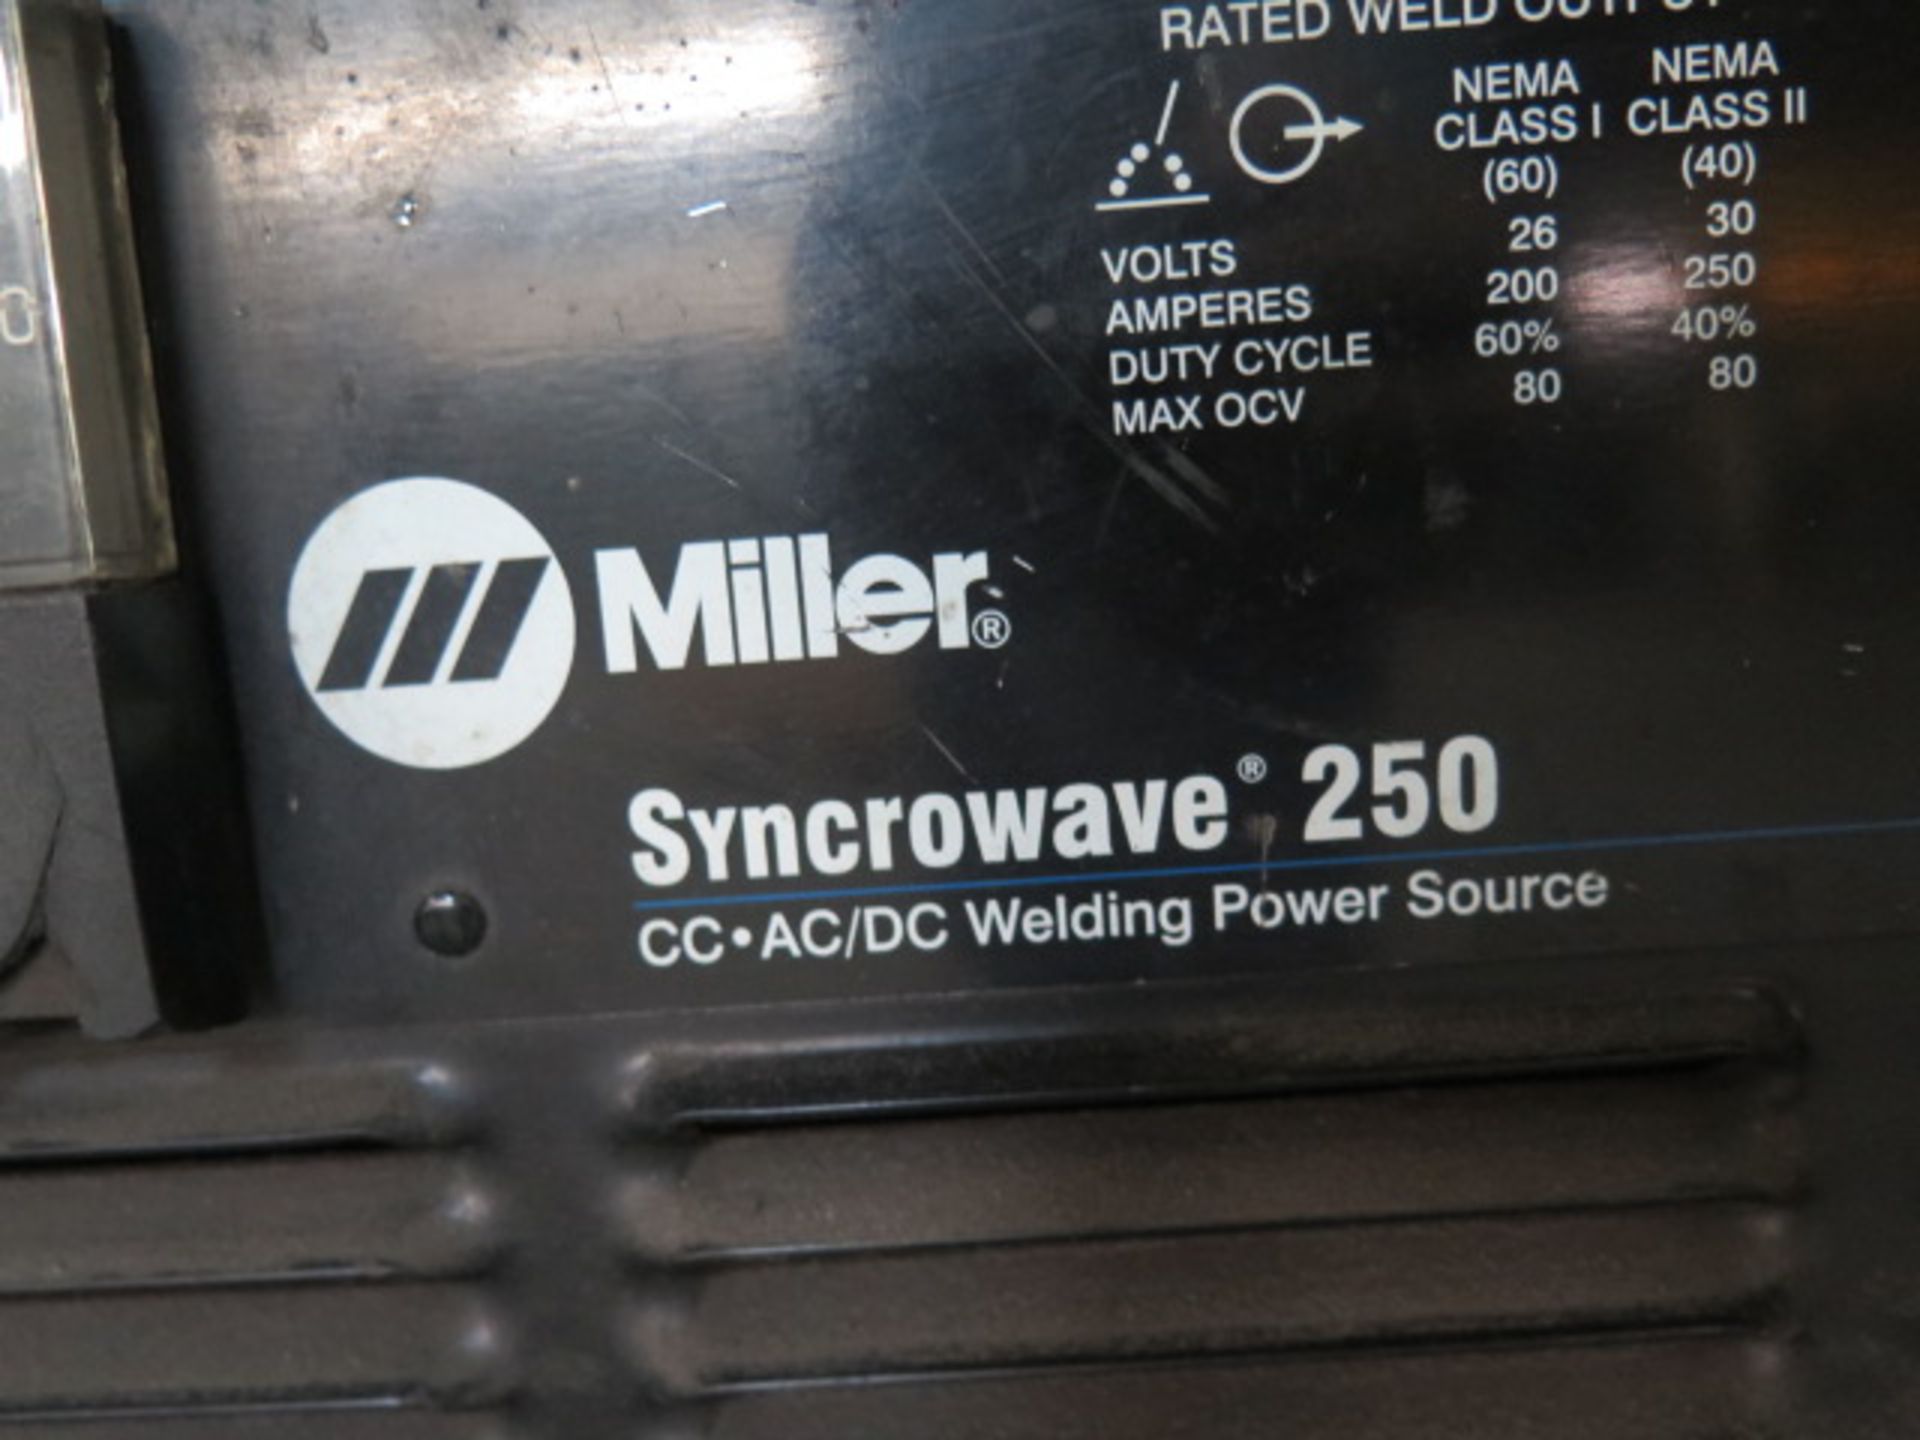 Miller Syncrowave 250 CC-AC/DC Arc welding Power Source s/n KH483474 w/ Cooler Cart SOLD AS-IS - Image 9 of 9